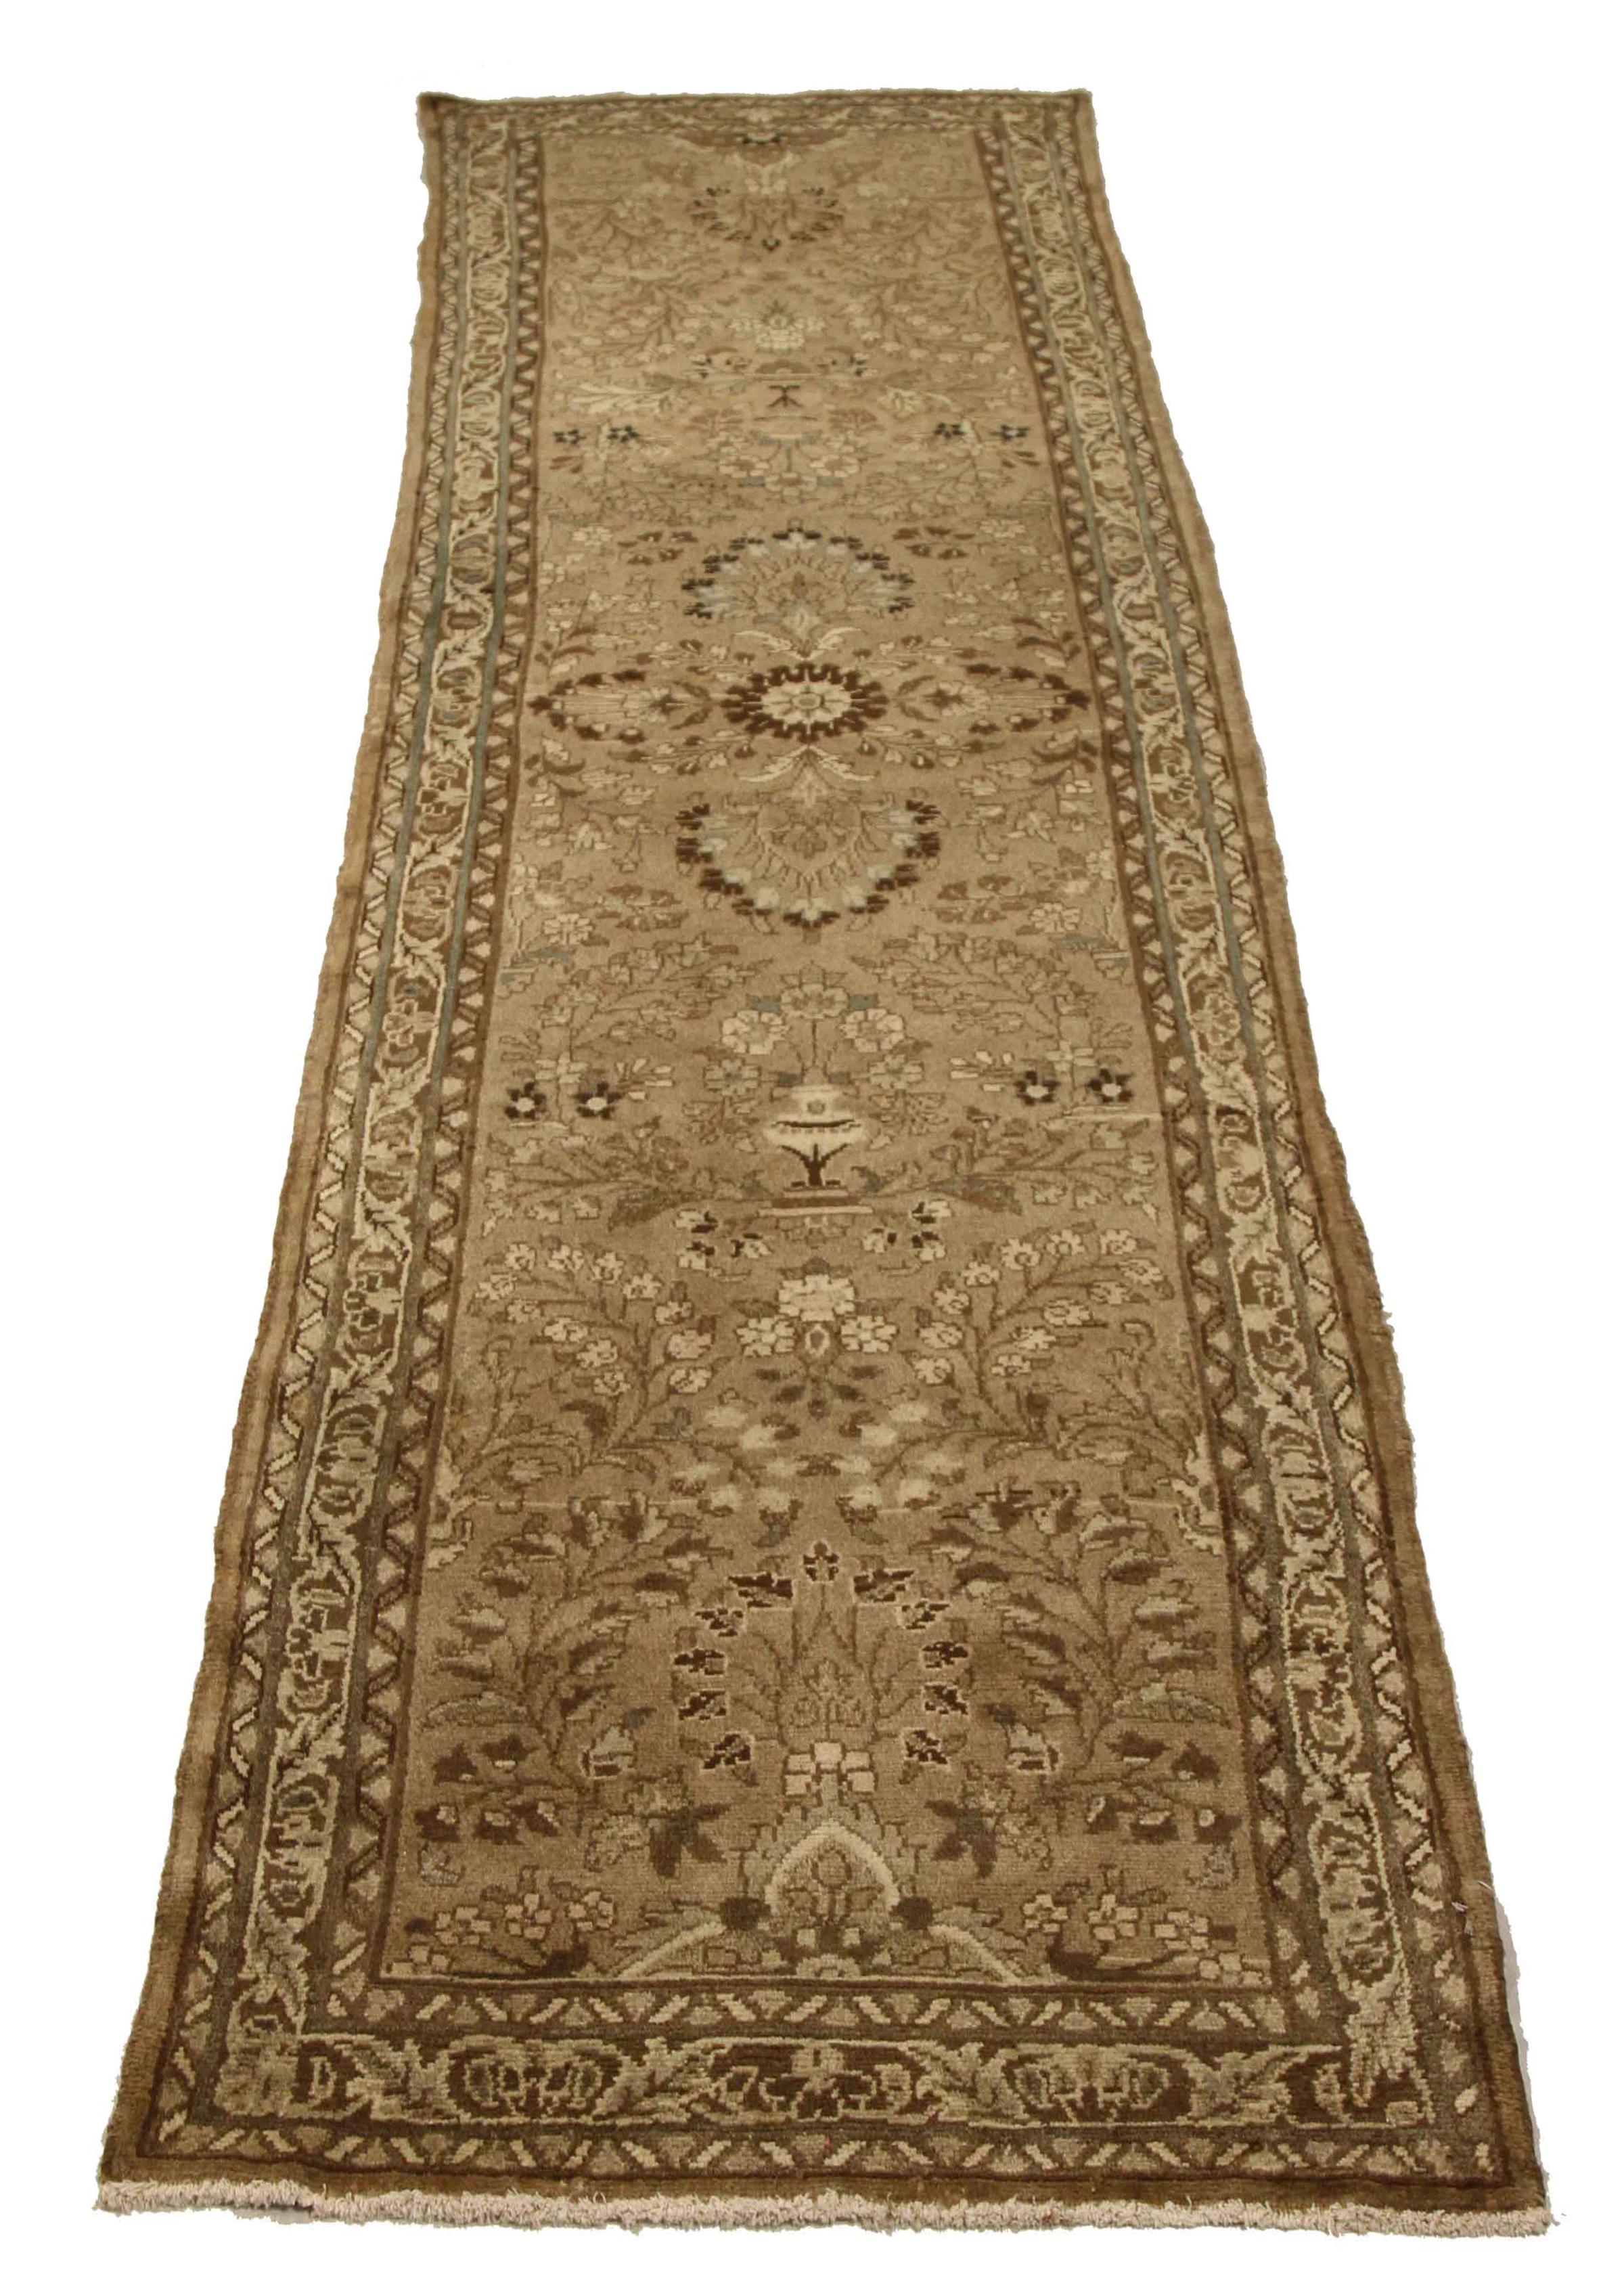 Antique Persian runner rug handwoven from the finest sheep’s wool. It’s colored with all-natural vegetable dyes that are safe for humans and pets. It’s a traditional Malayer design featuring ivory and brown floral details on a beige field. It’s a